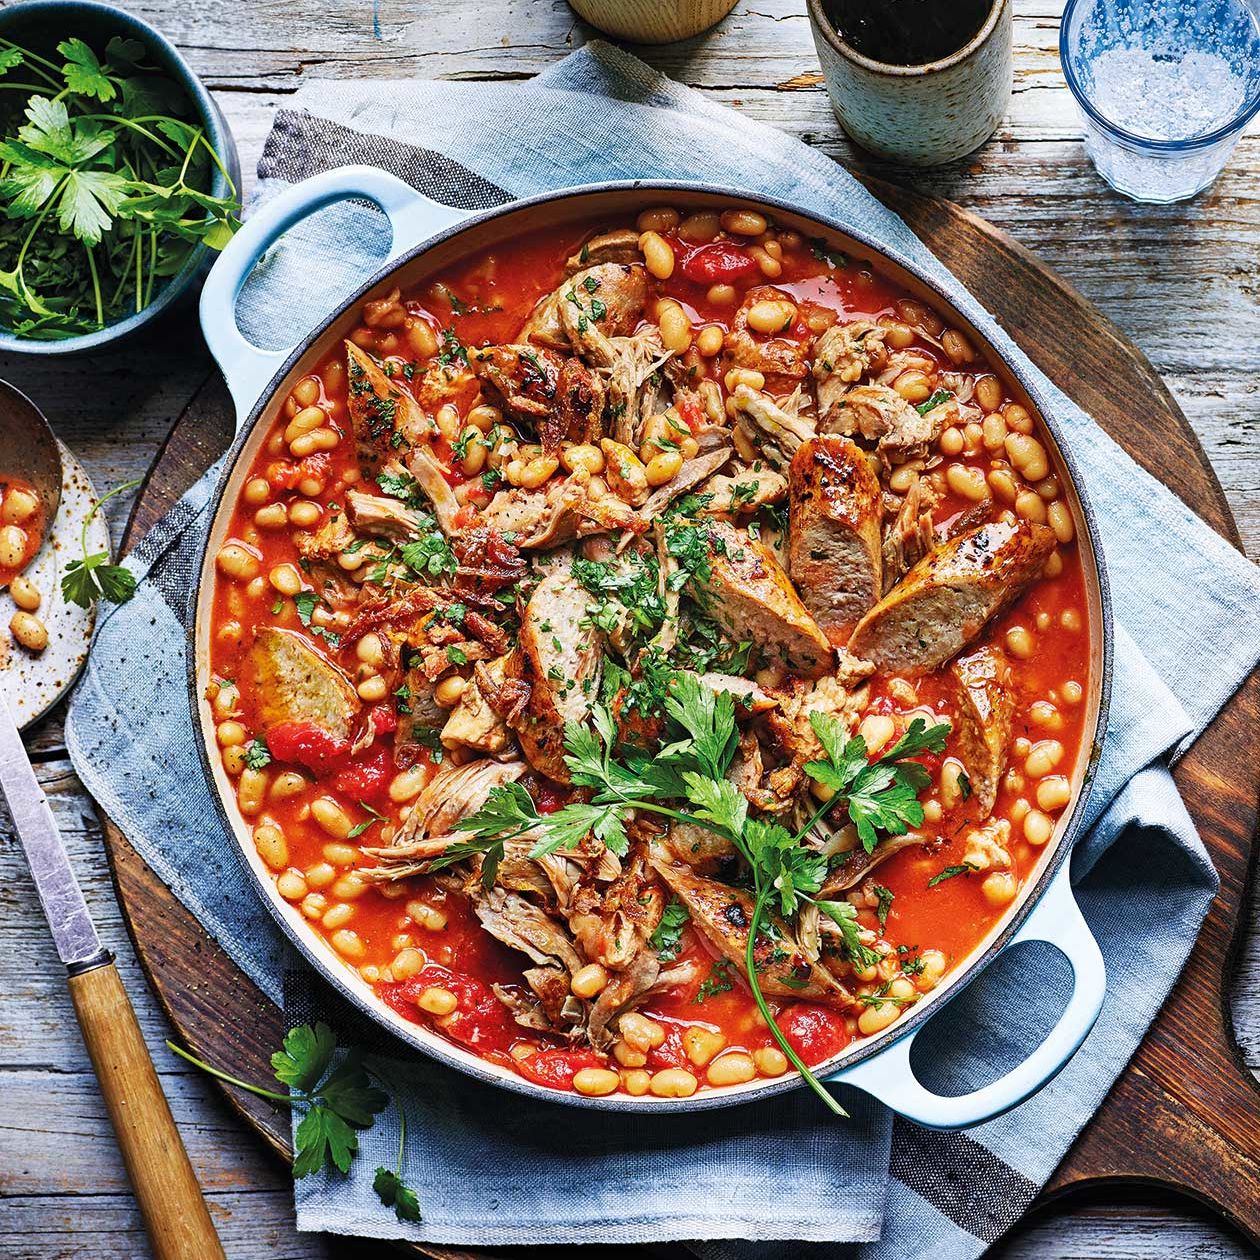 Easy cassoulet recipe with duck and sausage